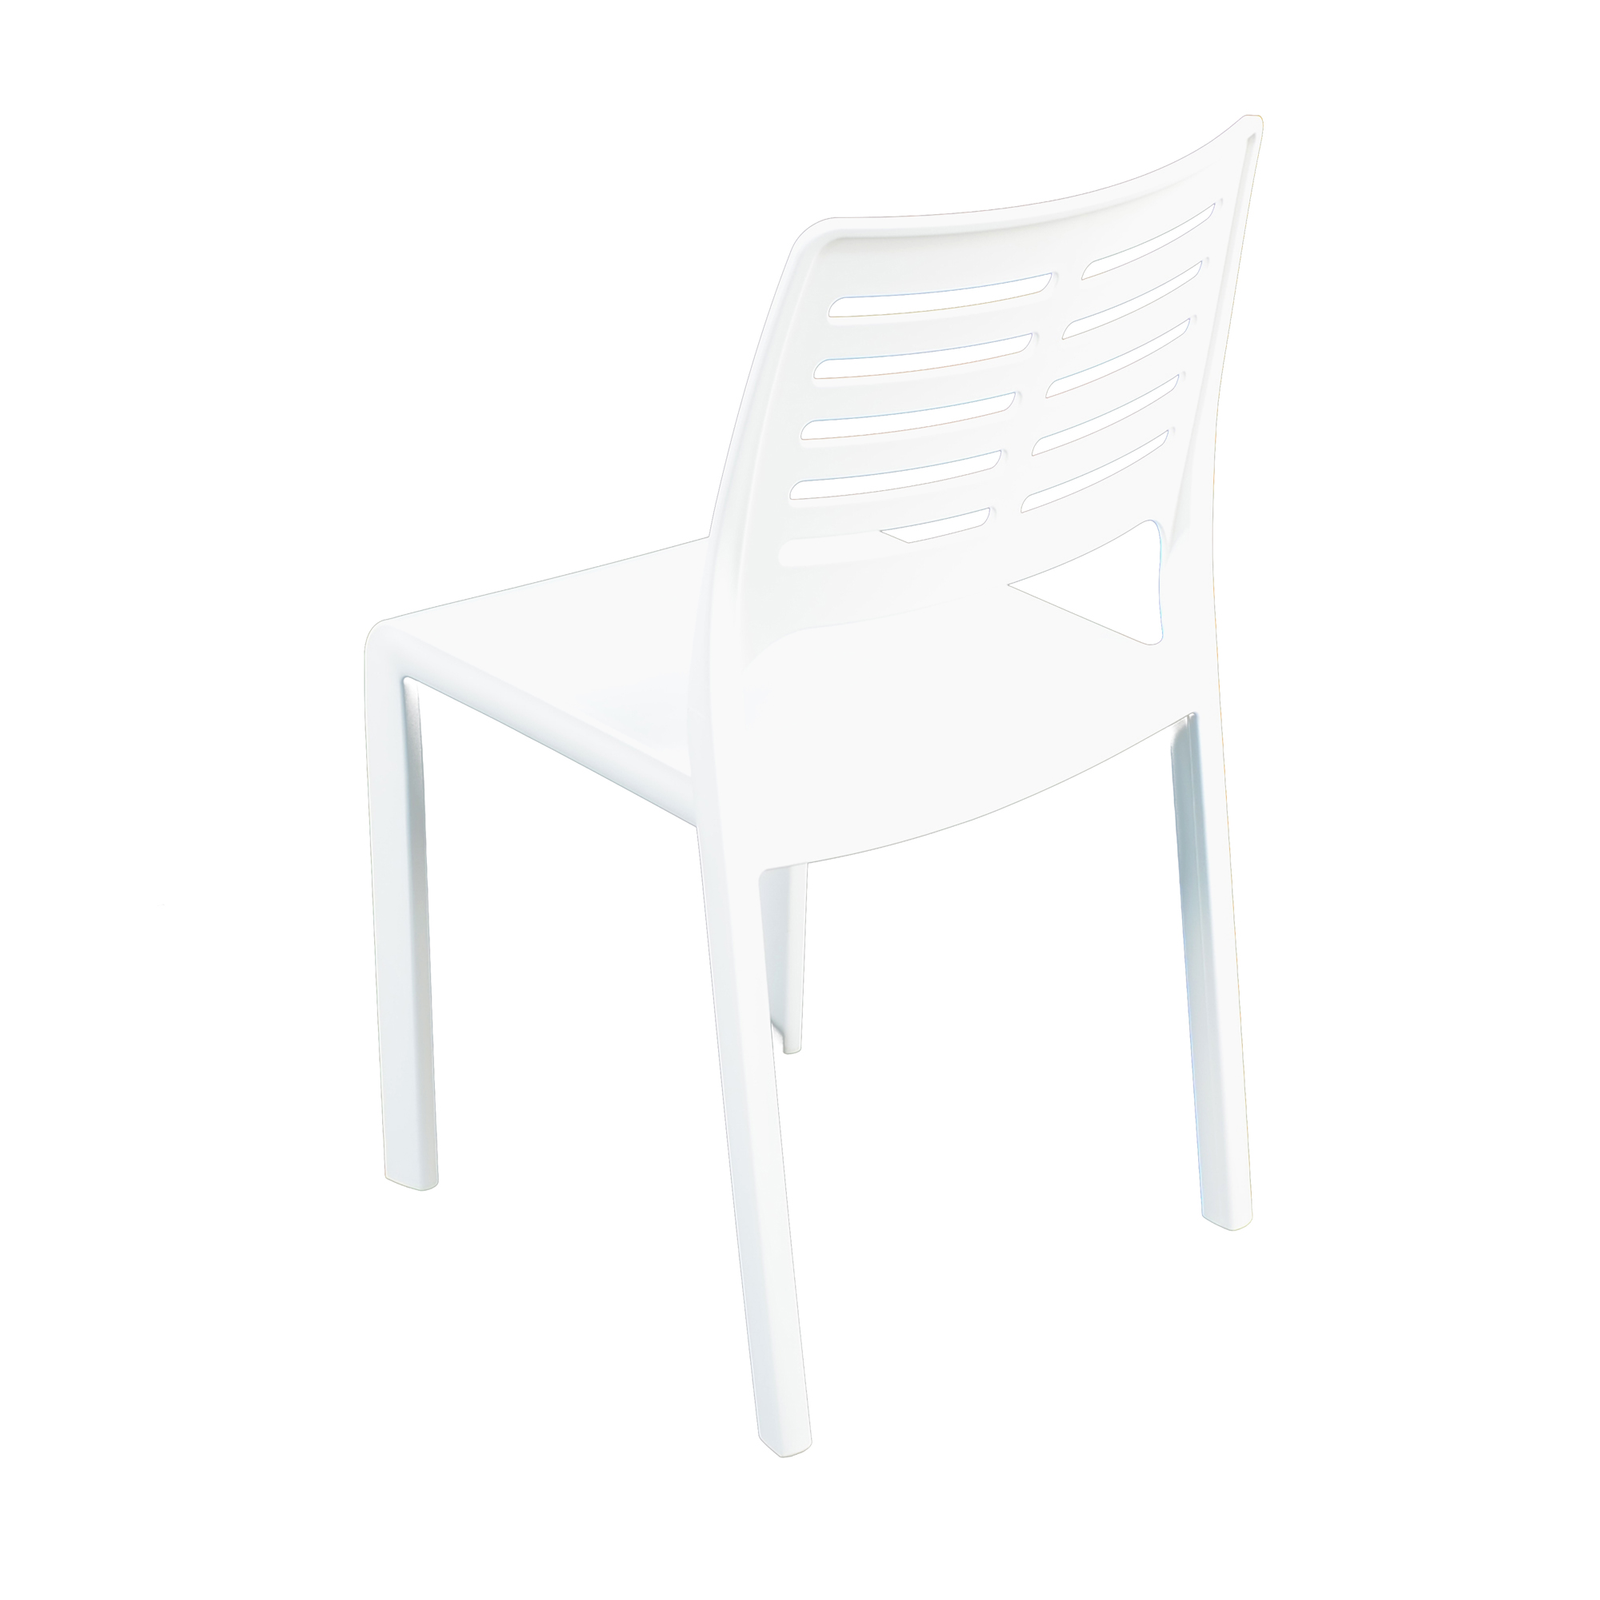 Trabella Mistral Chair in White (Pack of 2) Chairs Trabella   